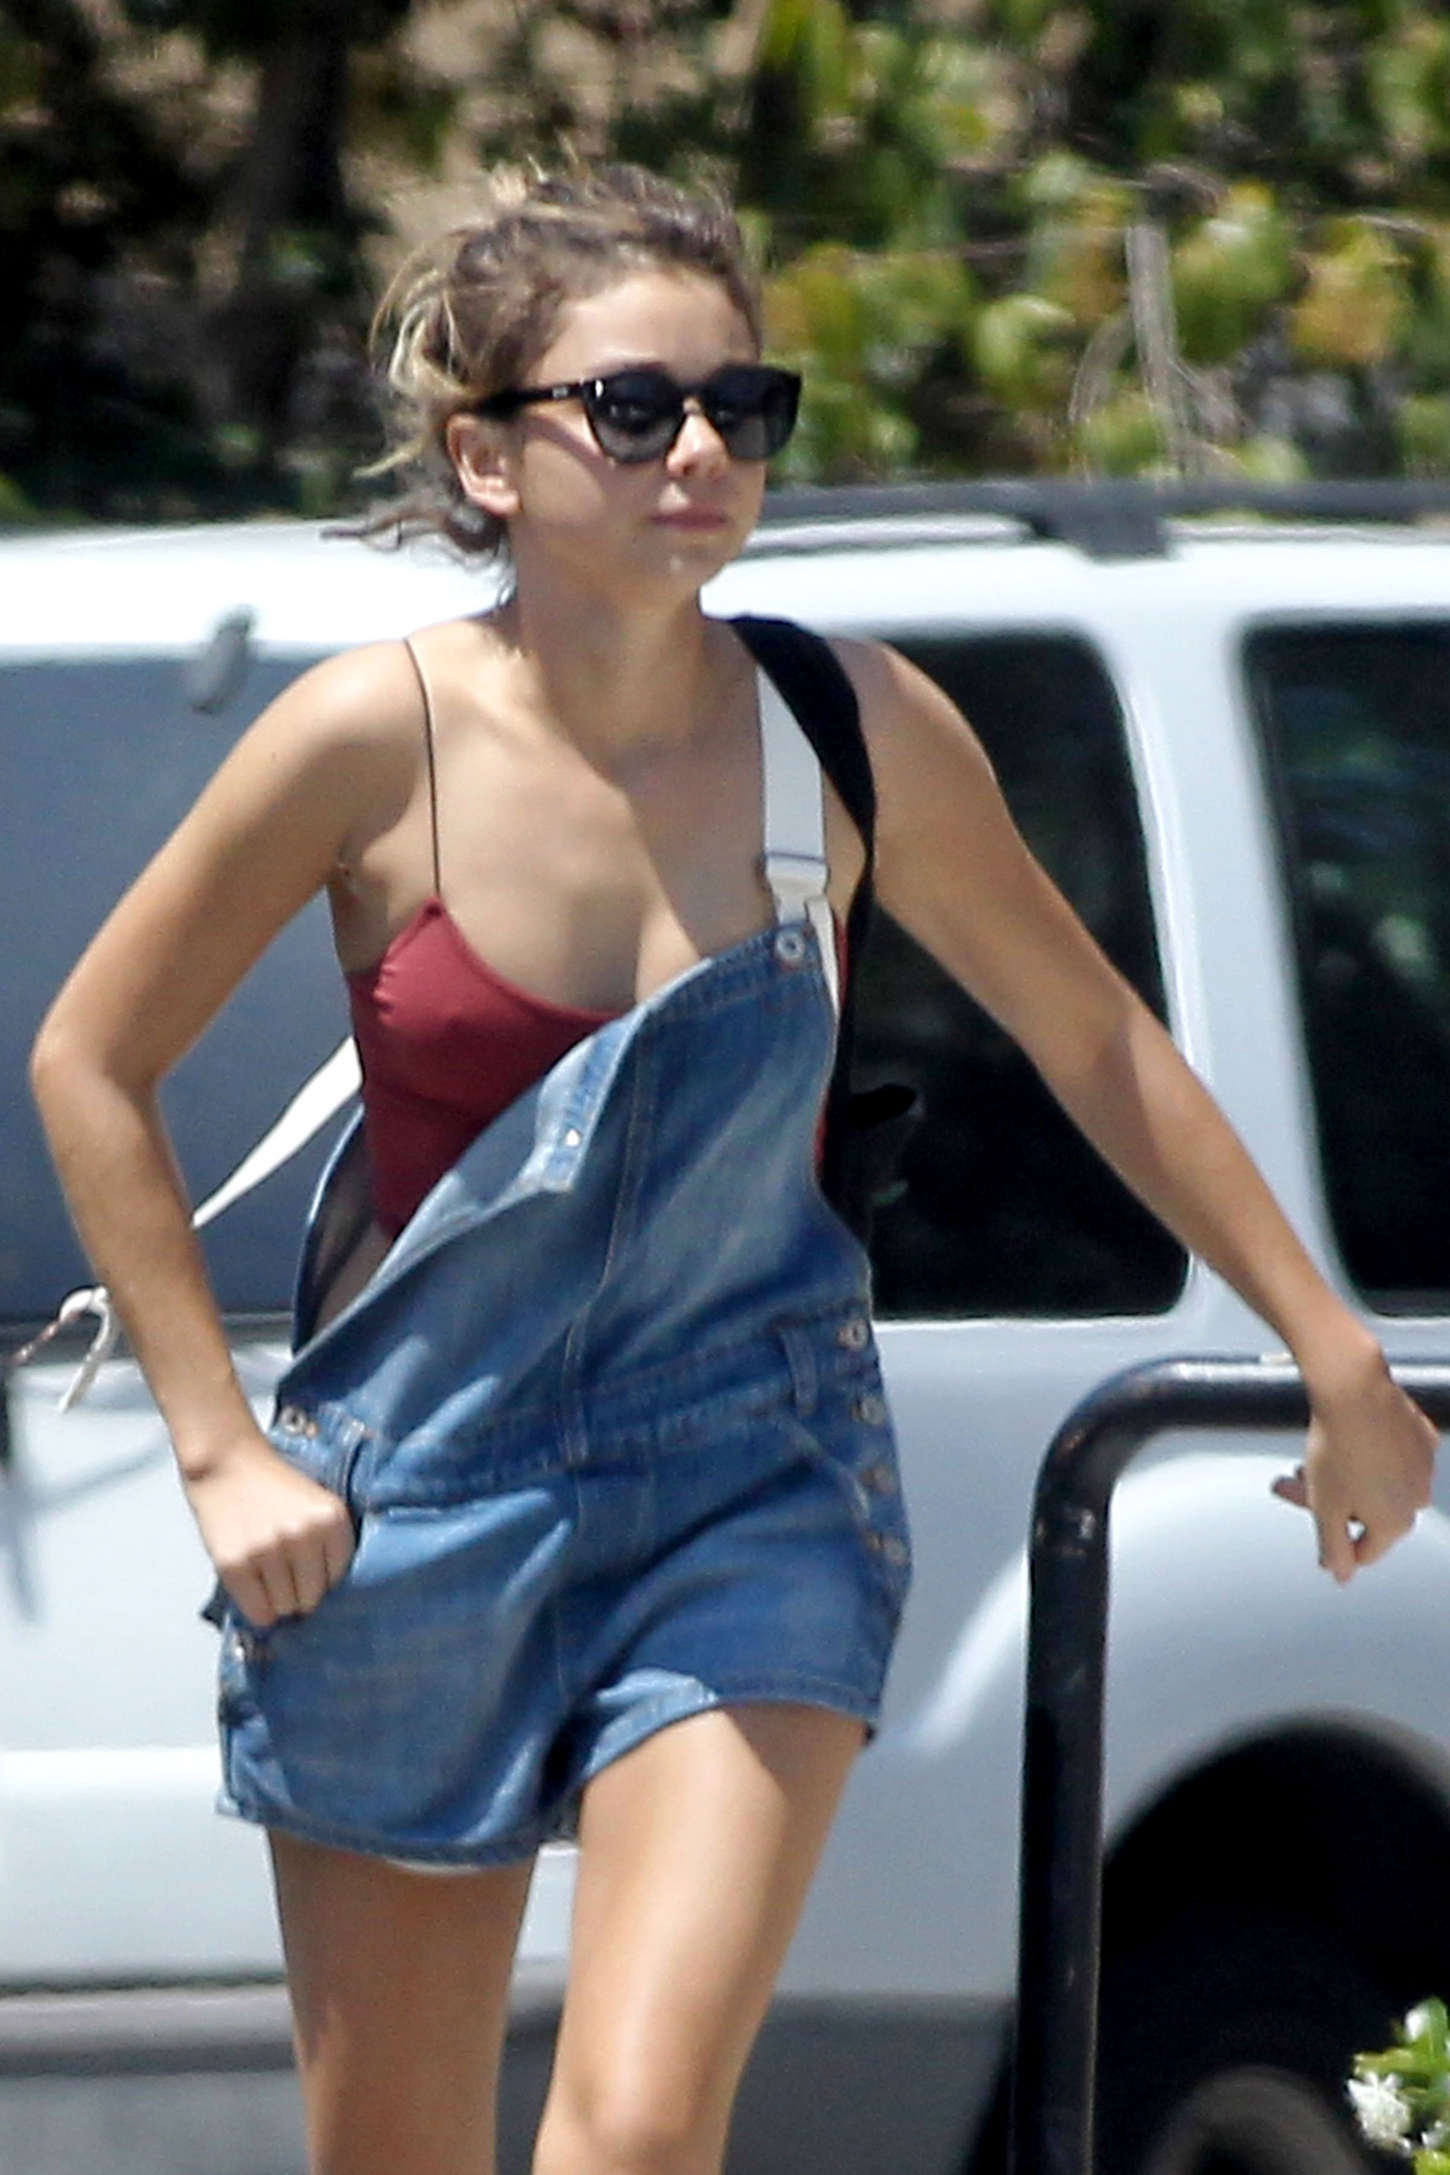 Sarah Hyland in Jeans Shorts Shopping in LA.